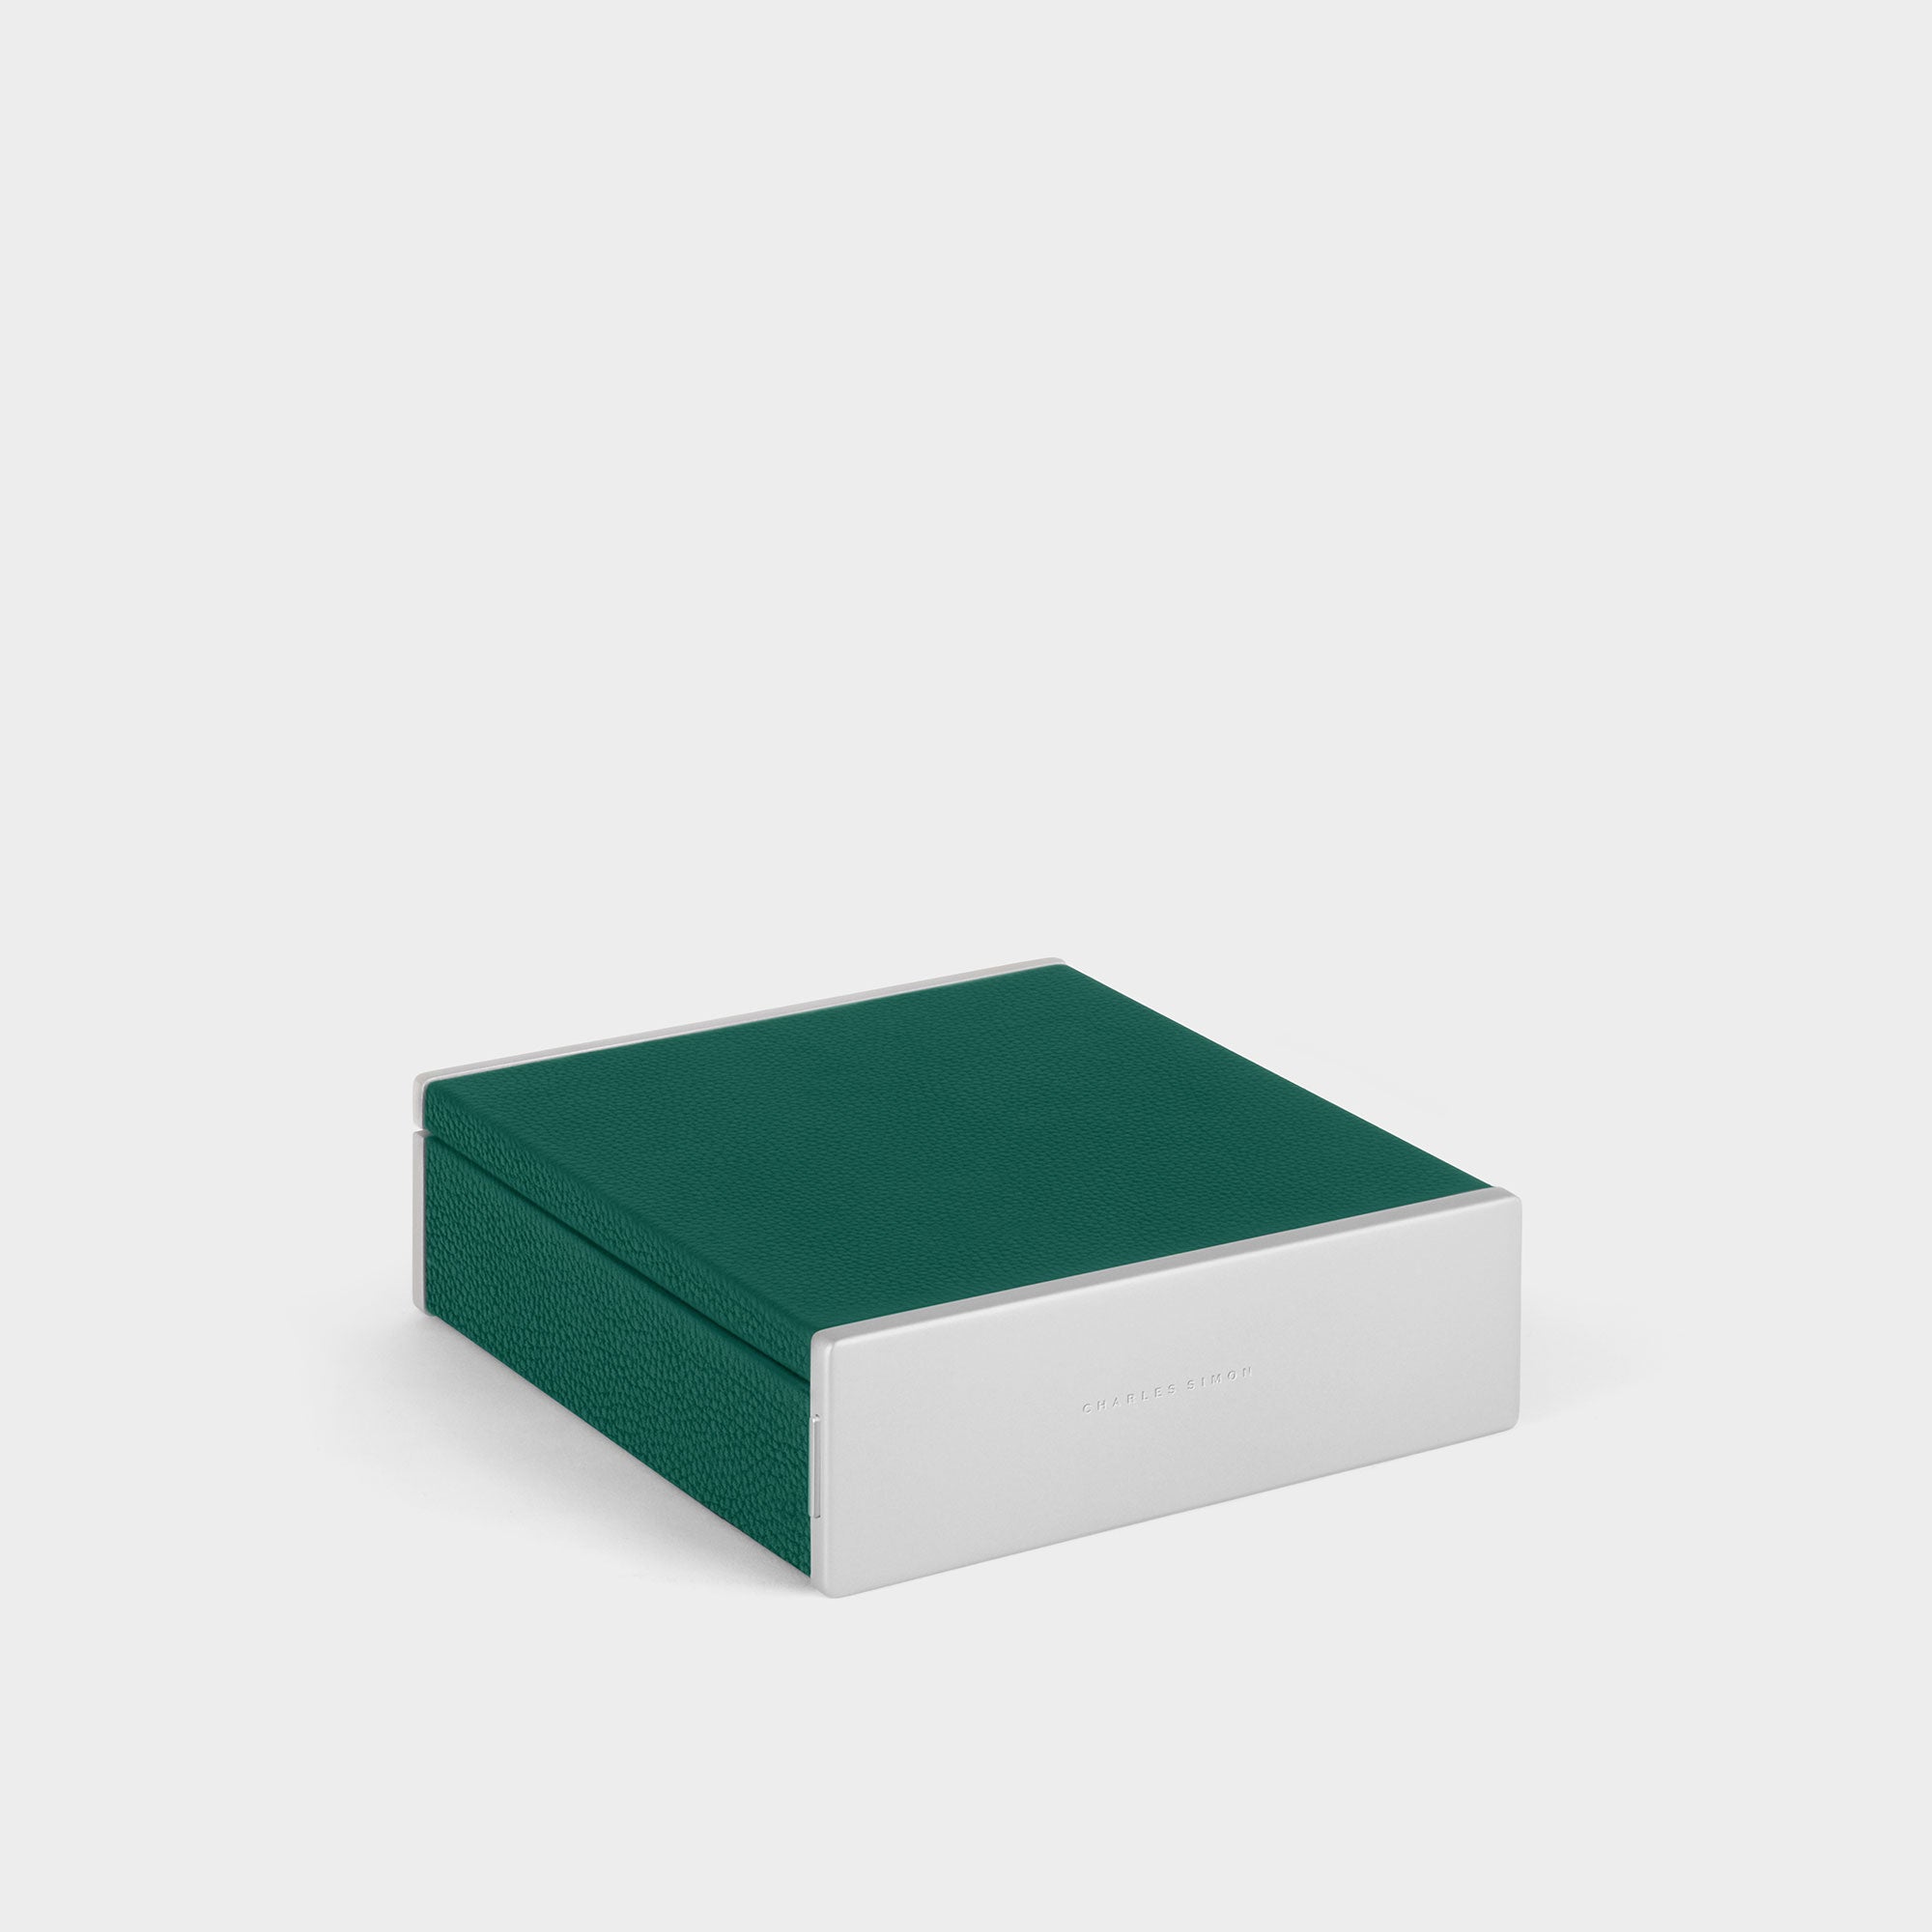 Closed designer watch box by Charles Simon. Handcrafted in Canada from emerald leather and deep blue interior.